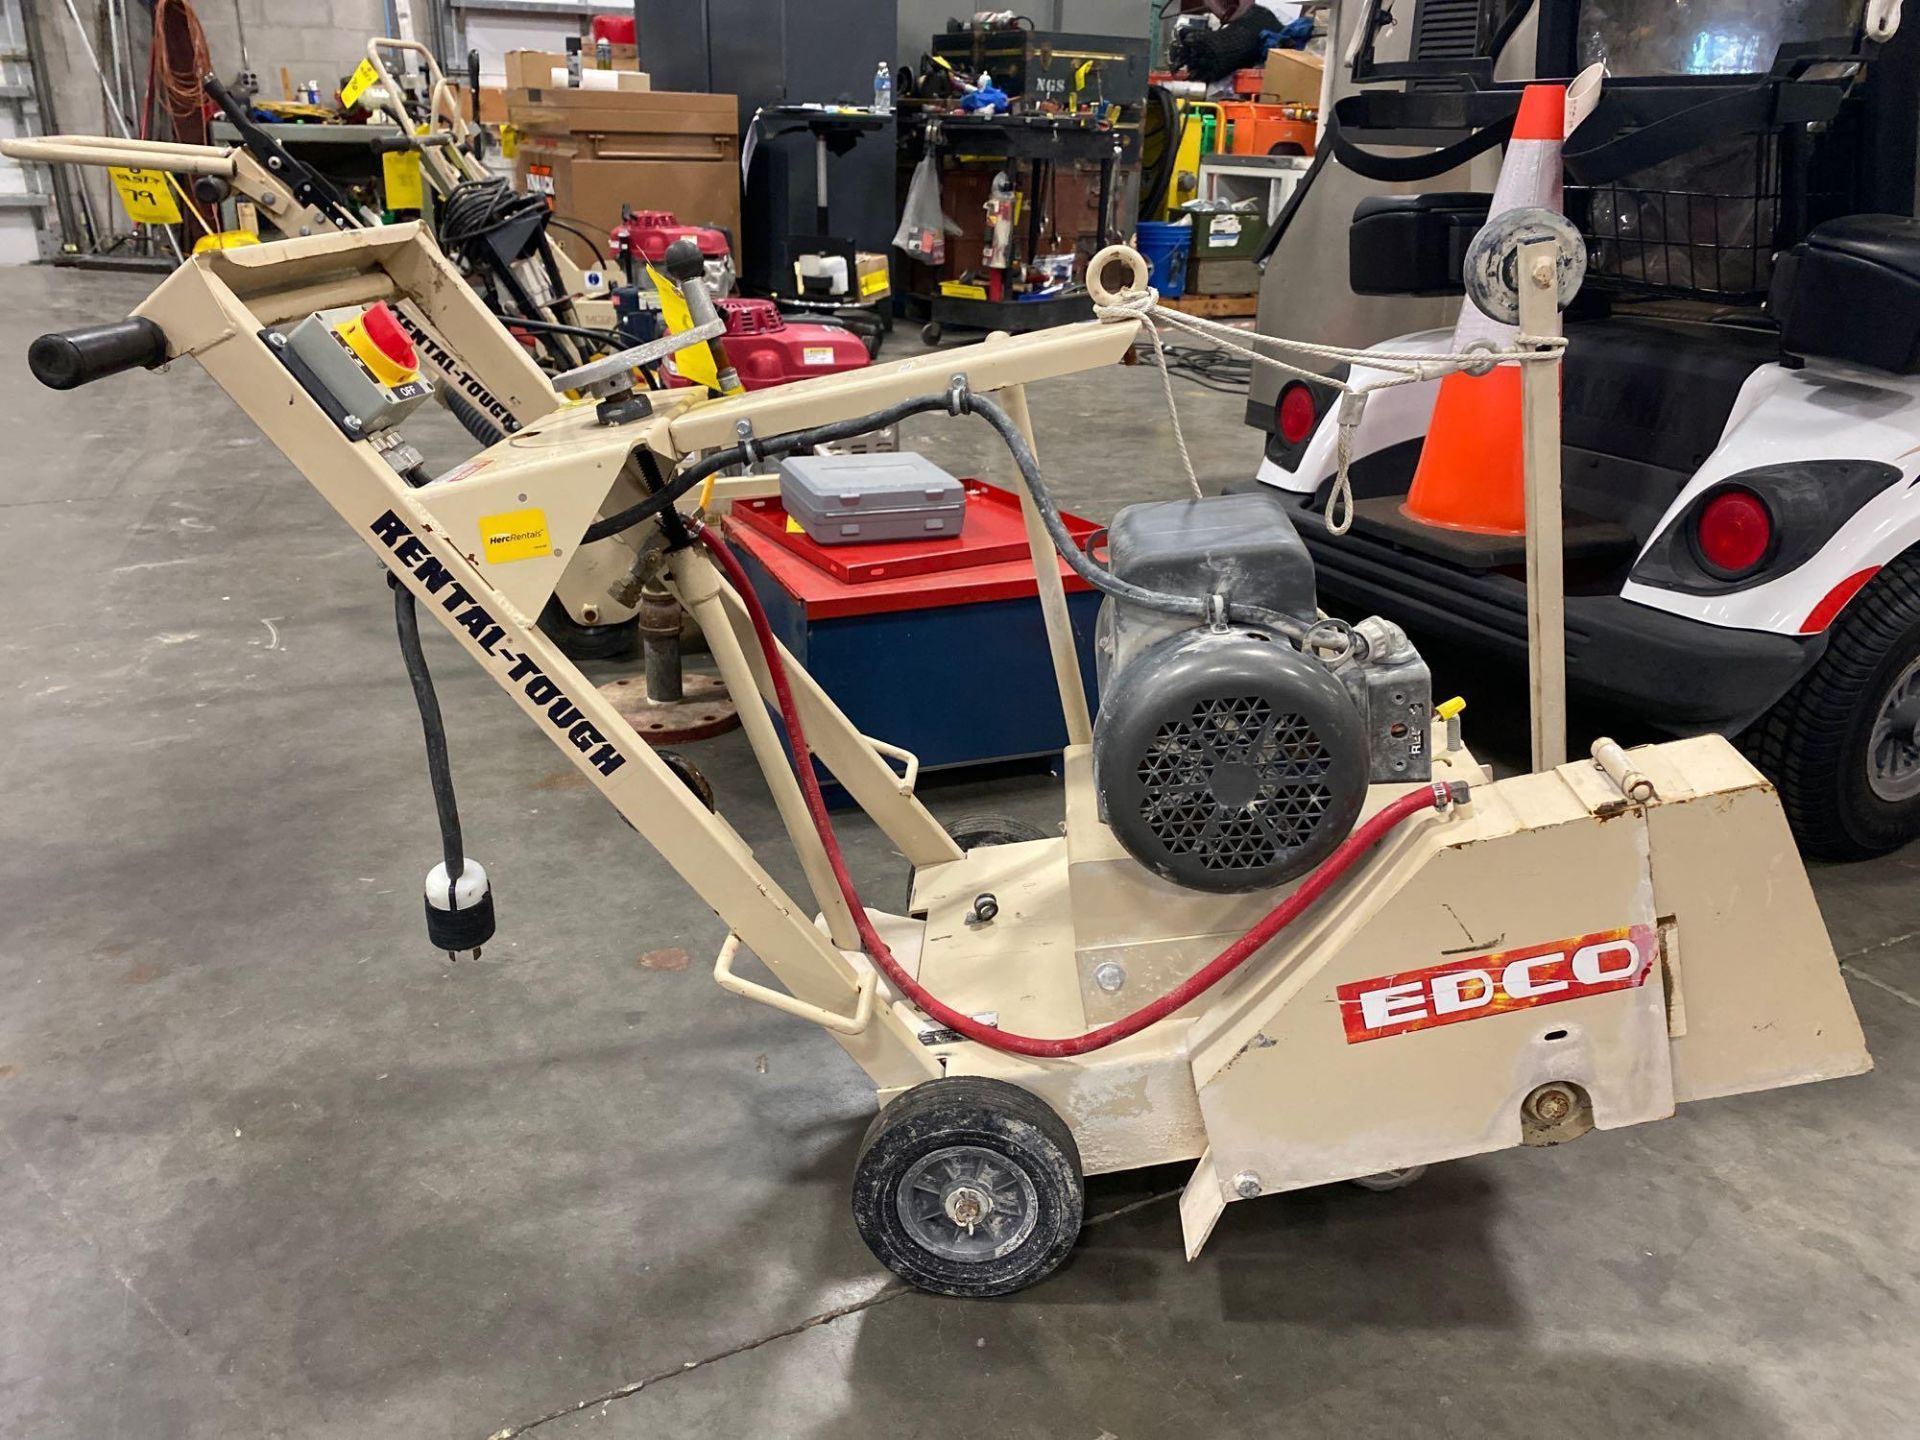 2017 EDCO DS-18-5 WALKBEHIND SAW SUPPORT EQUIPMENT - Image 12 of 20